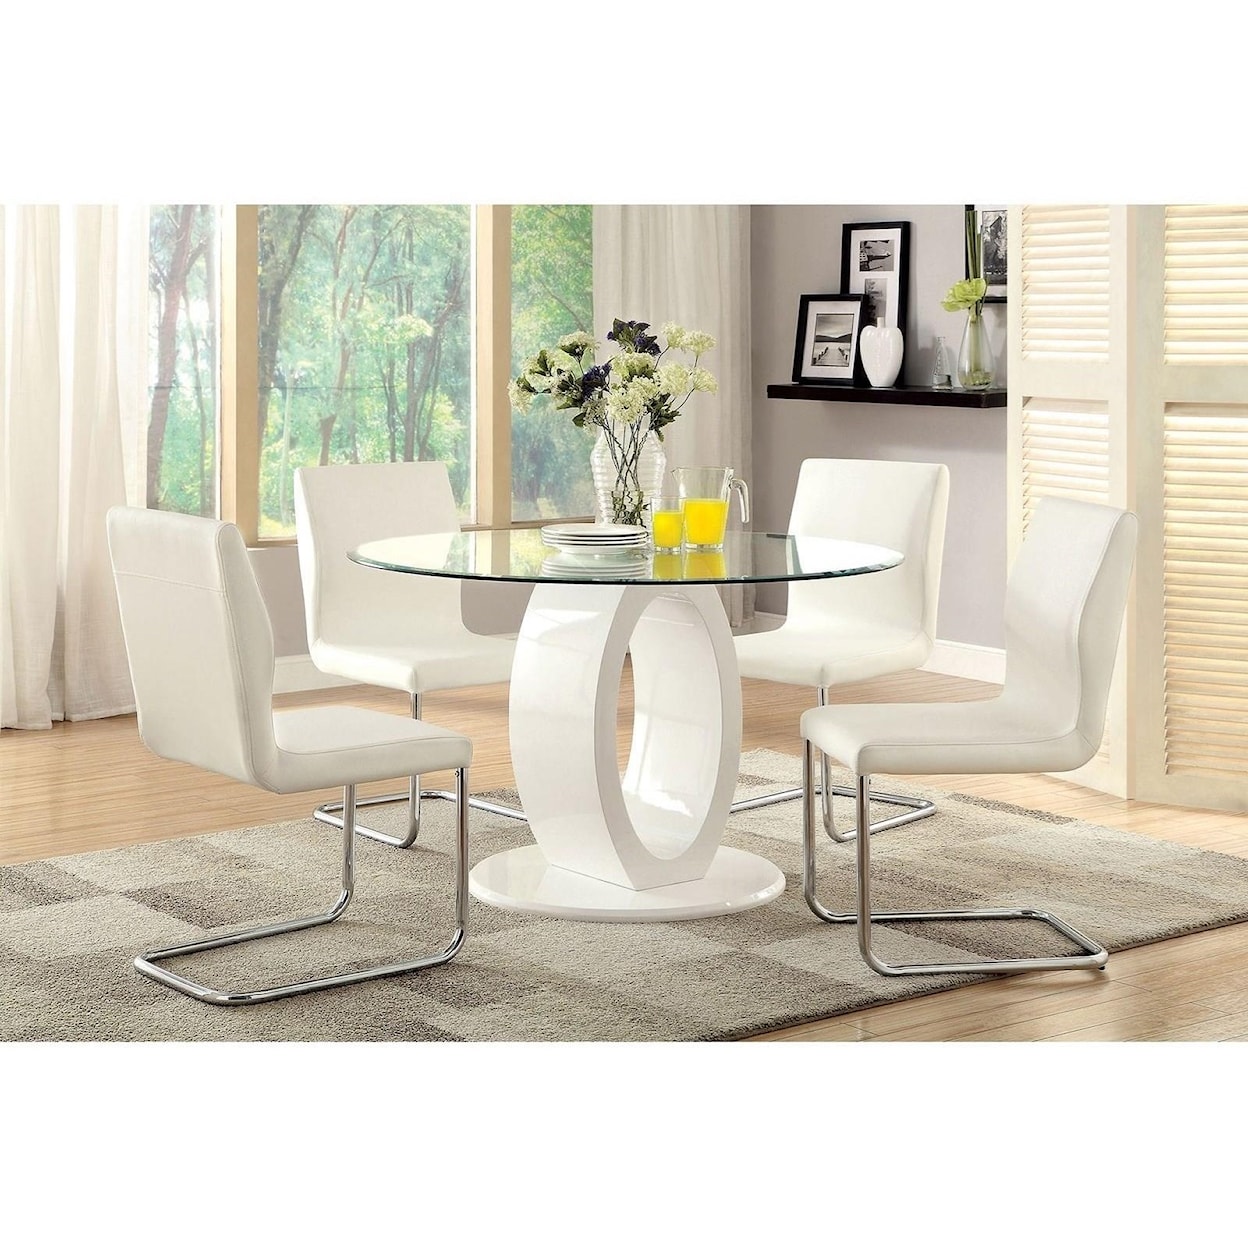 Furniture of America Lodia I Round Table w/ Glass Top